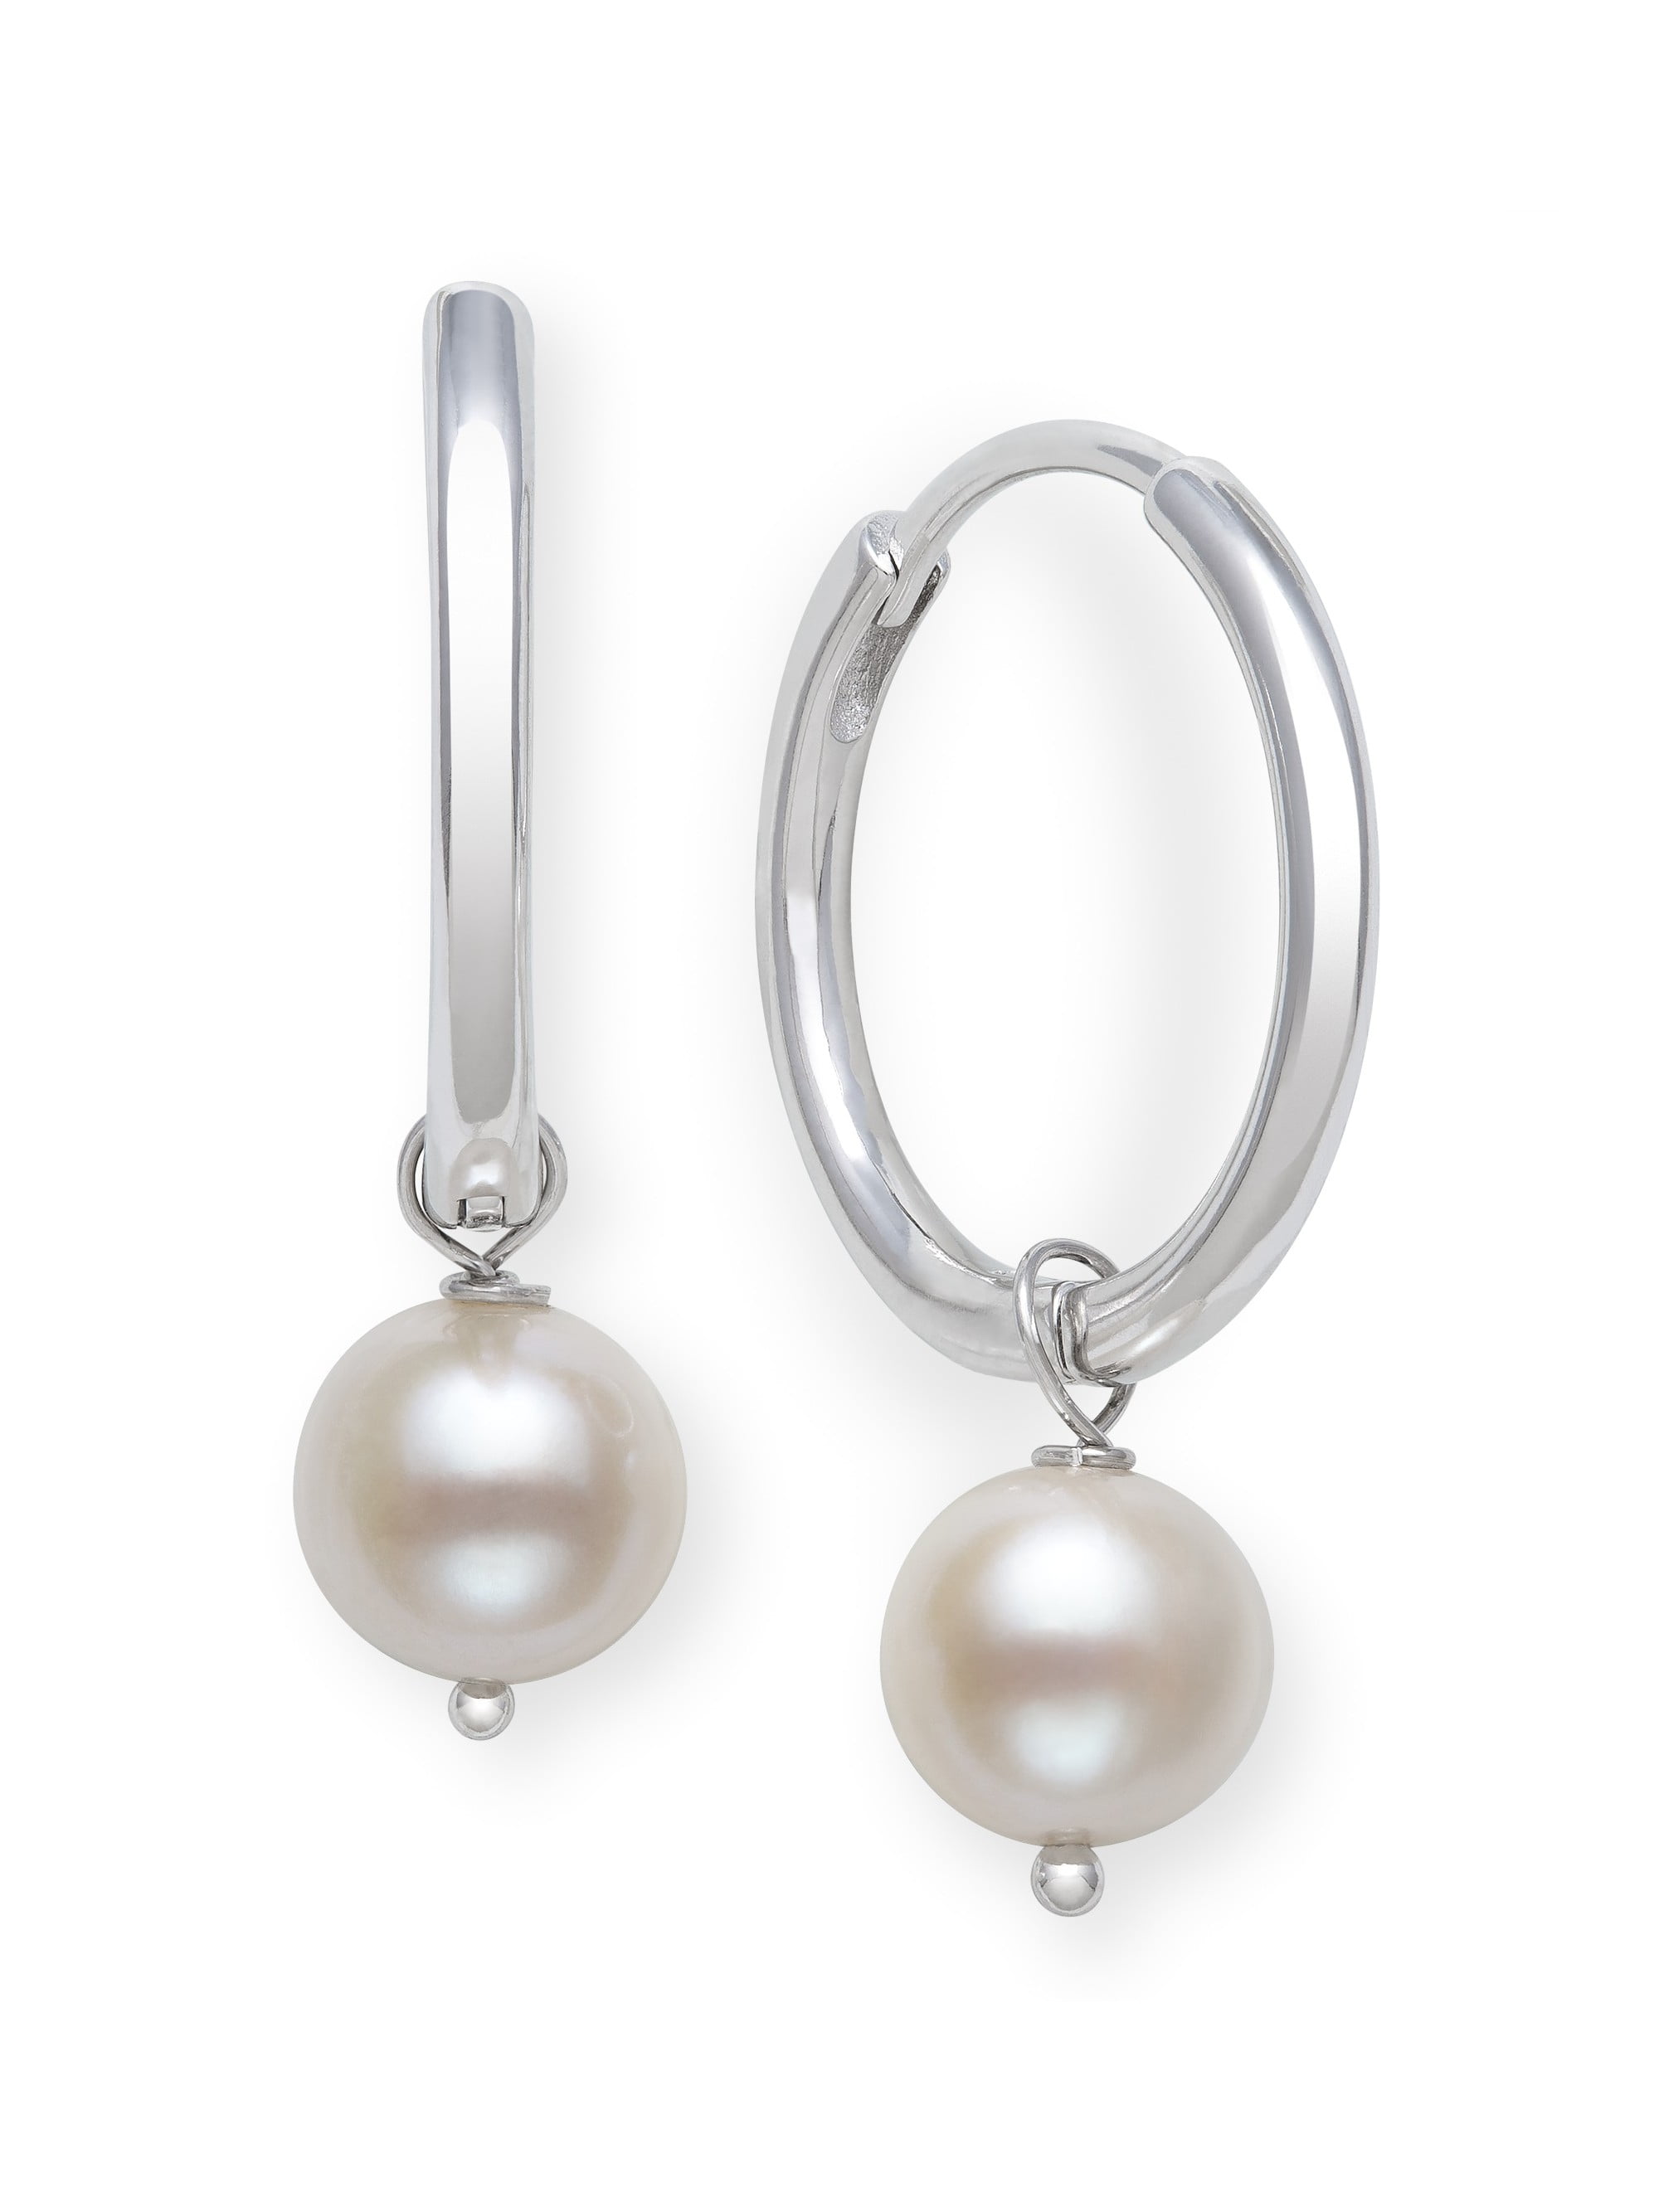 Pearl Earrings Freshwater Cultured Cluster Platinum Plated Solid Sterling Silver 